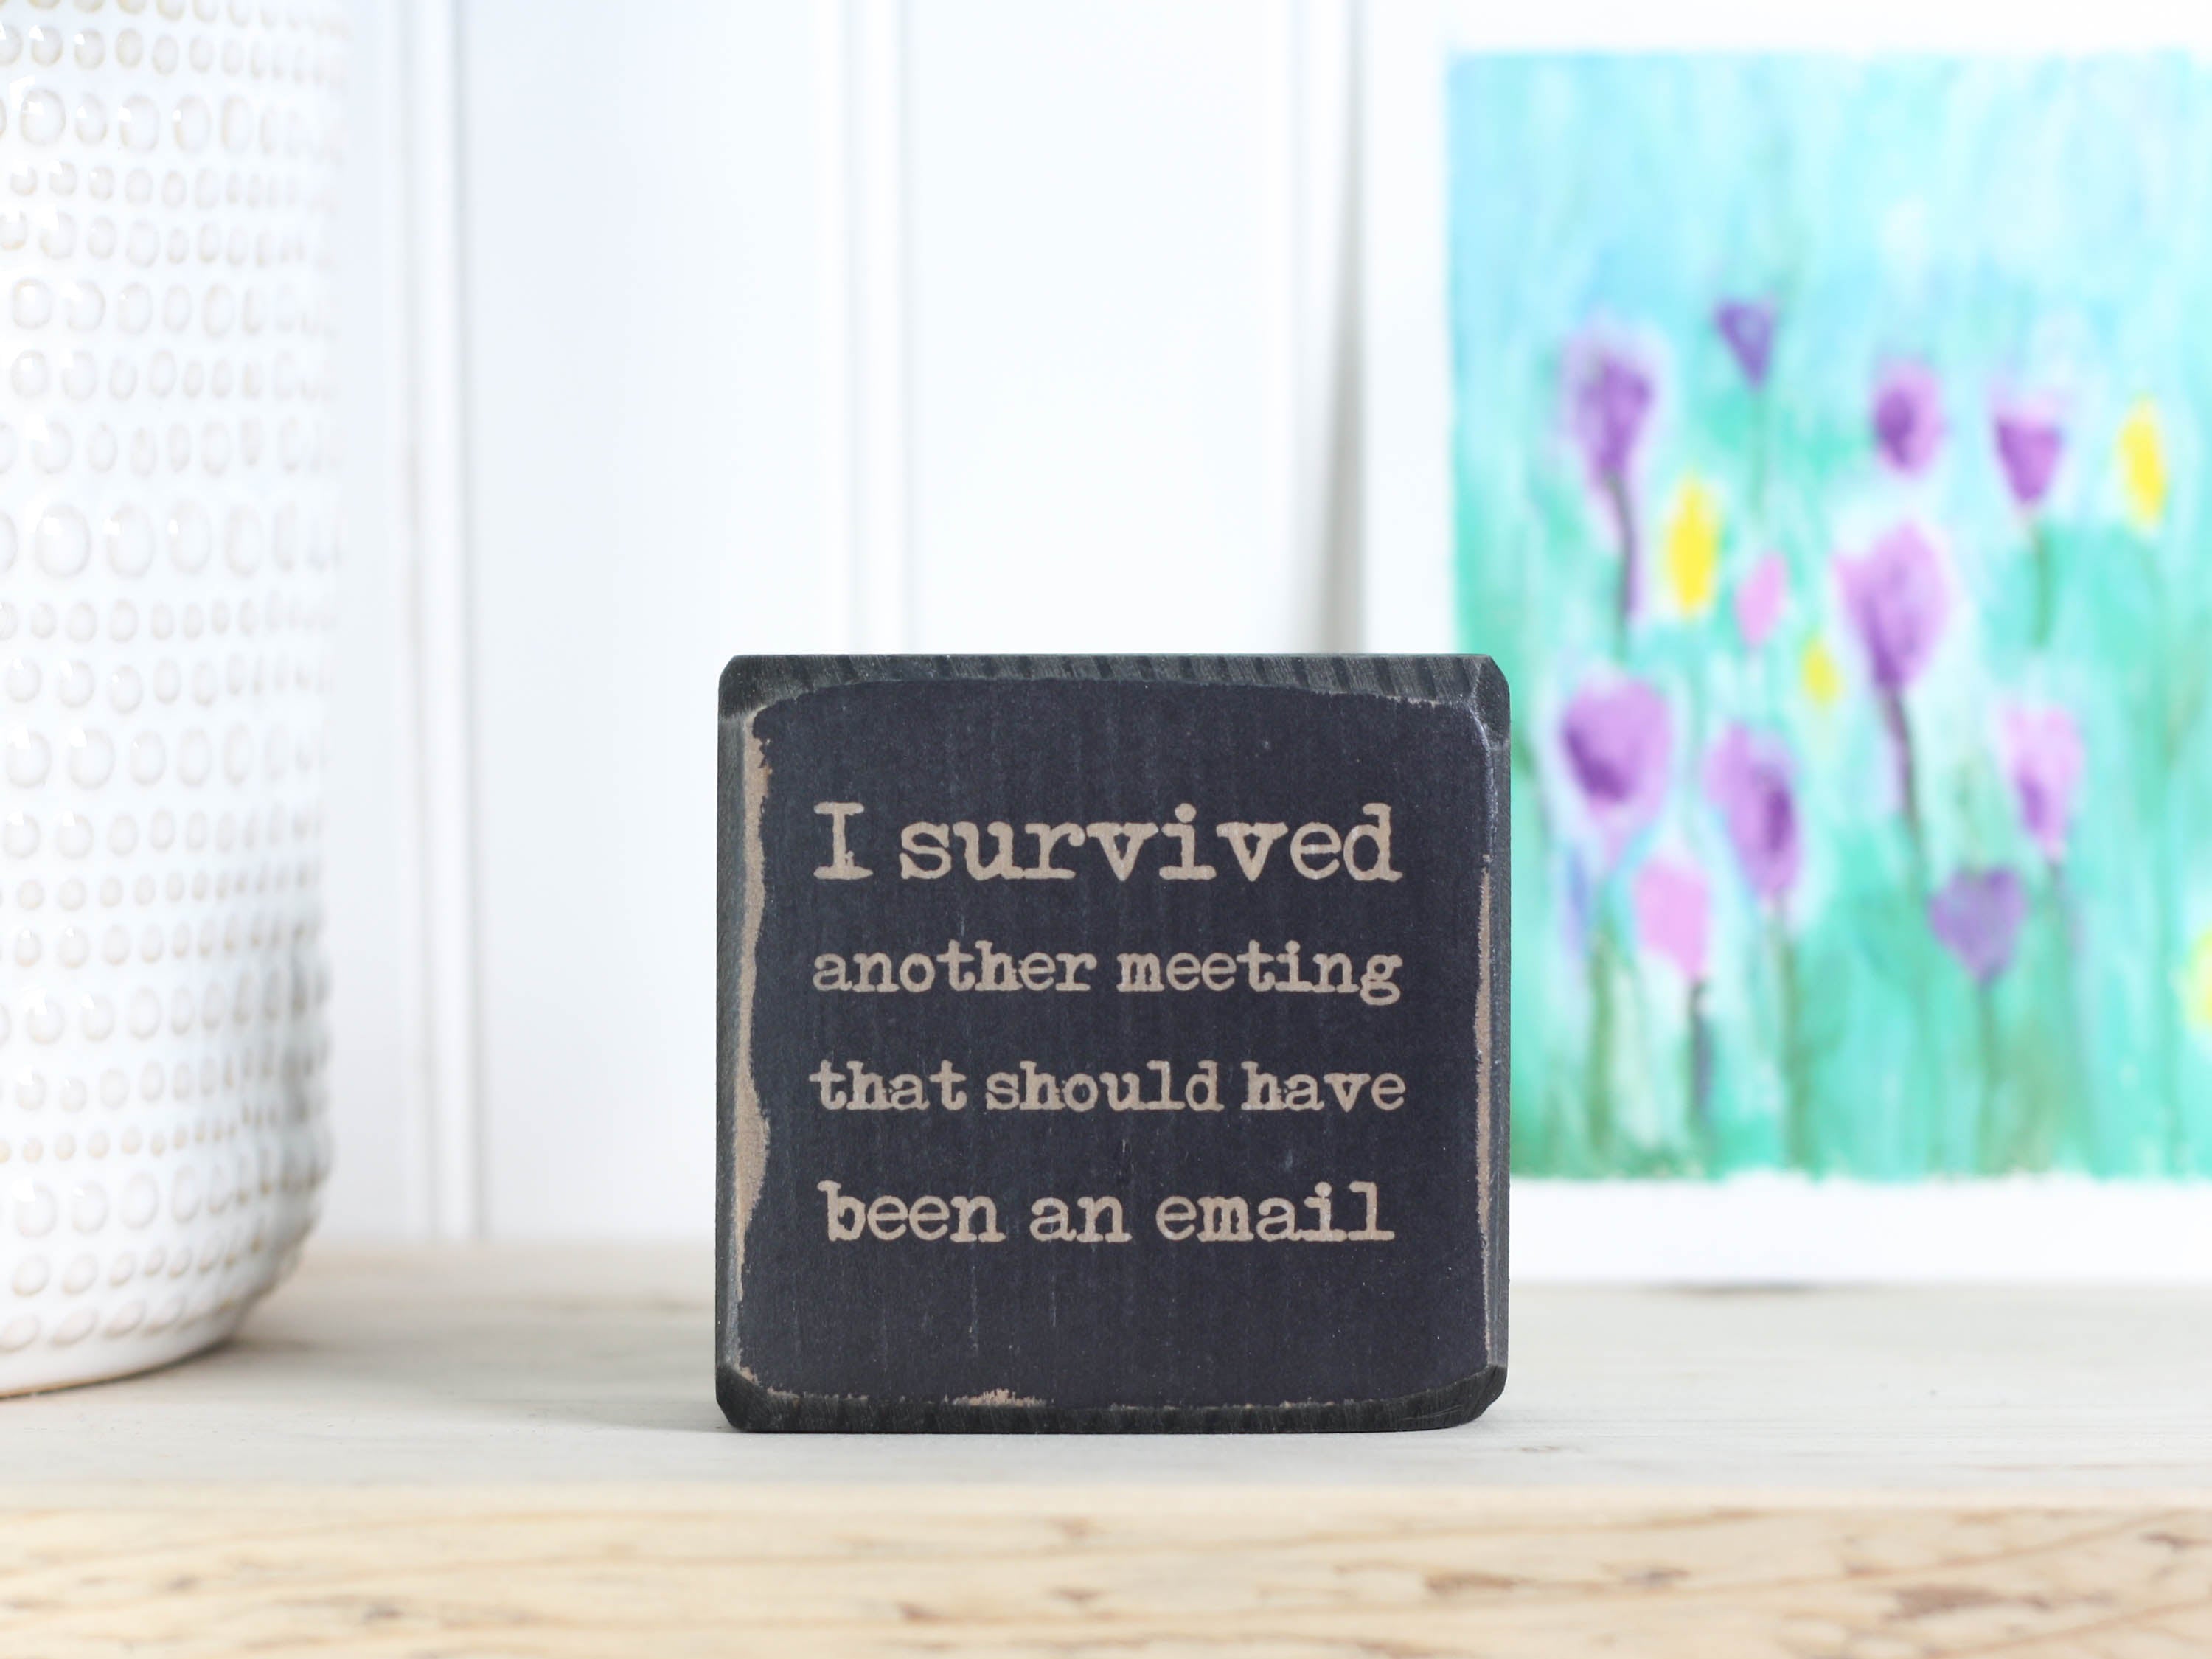 Small, freestanding distressed black wood sign with a funny saying on it "I survived another meeting that should have been an email".